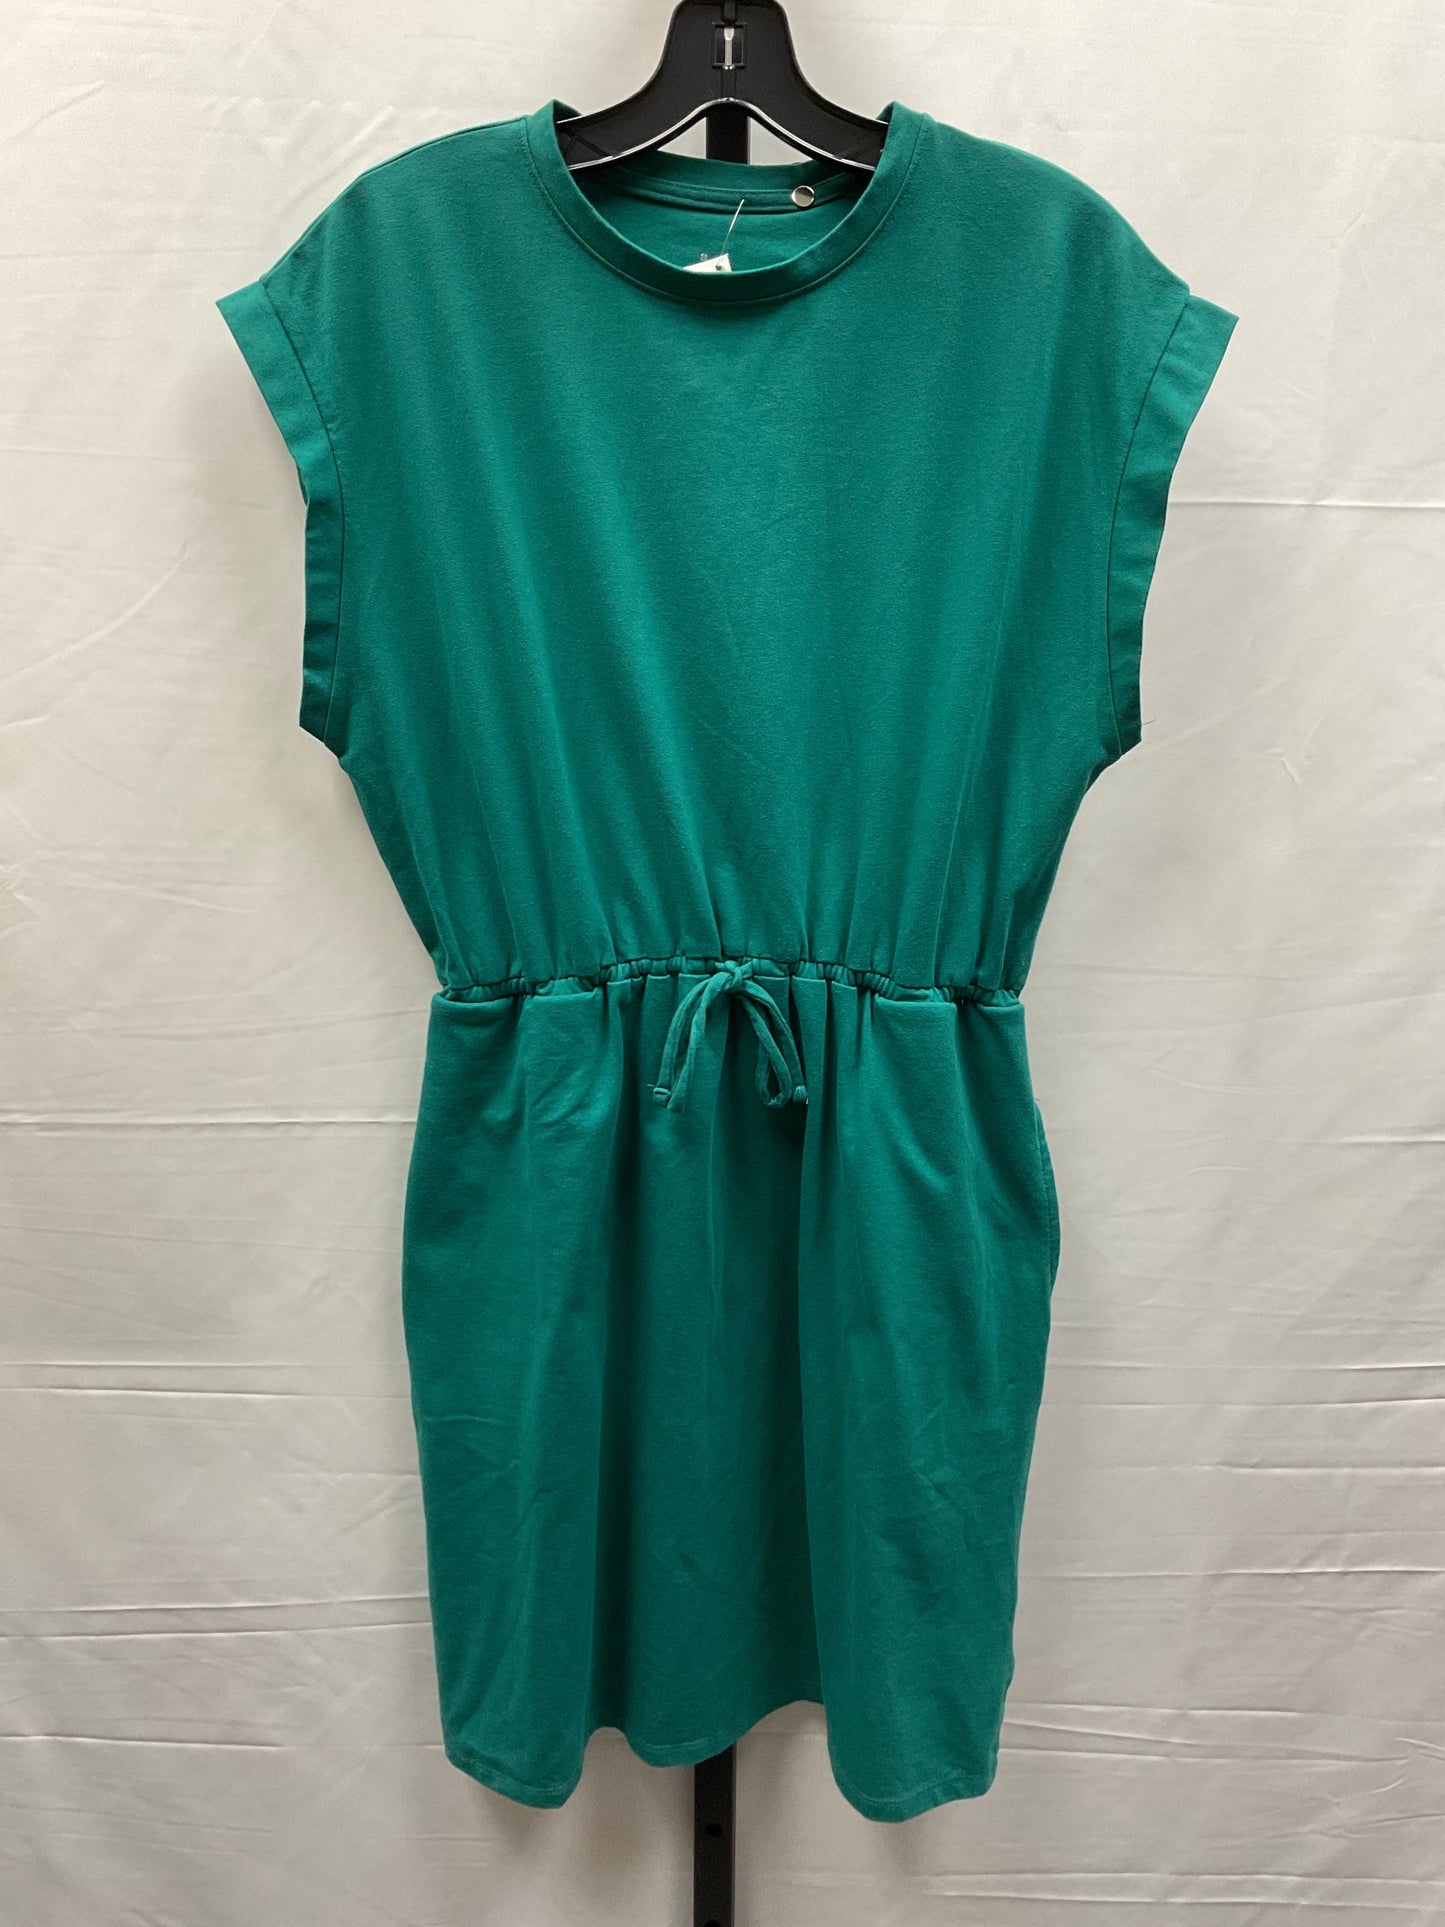 Teal Dress Casual Midi A New Day, Size M